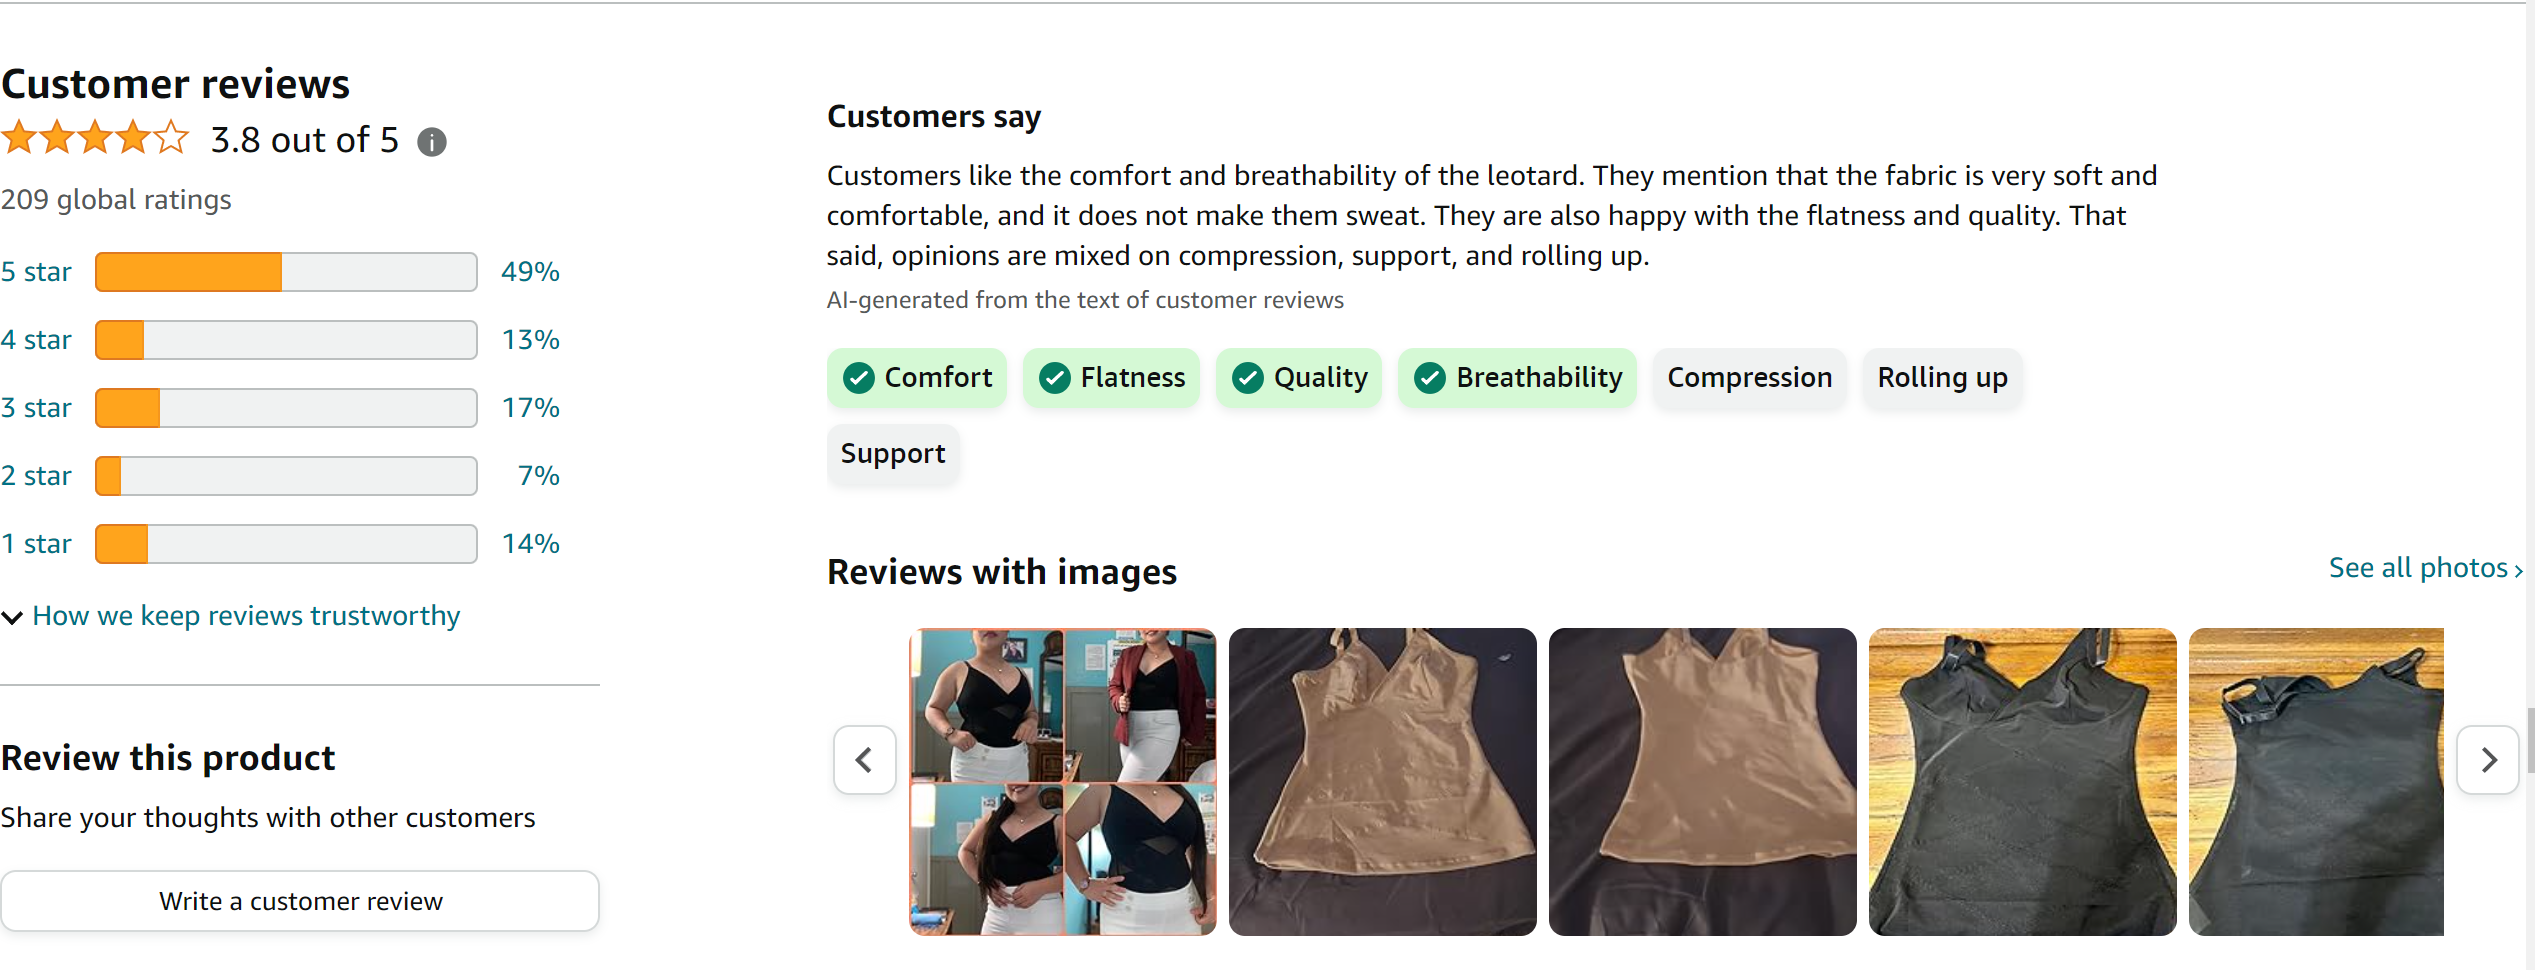 QACIVIQ Body Shaper for Women Tummy Control Shapewear Compression Tanks Cami Tops V-Neck Camisoles with Built in Bra from Amazon Reviews (screenshot taken on 2024-2-21)